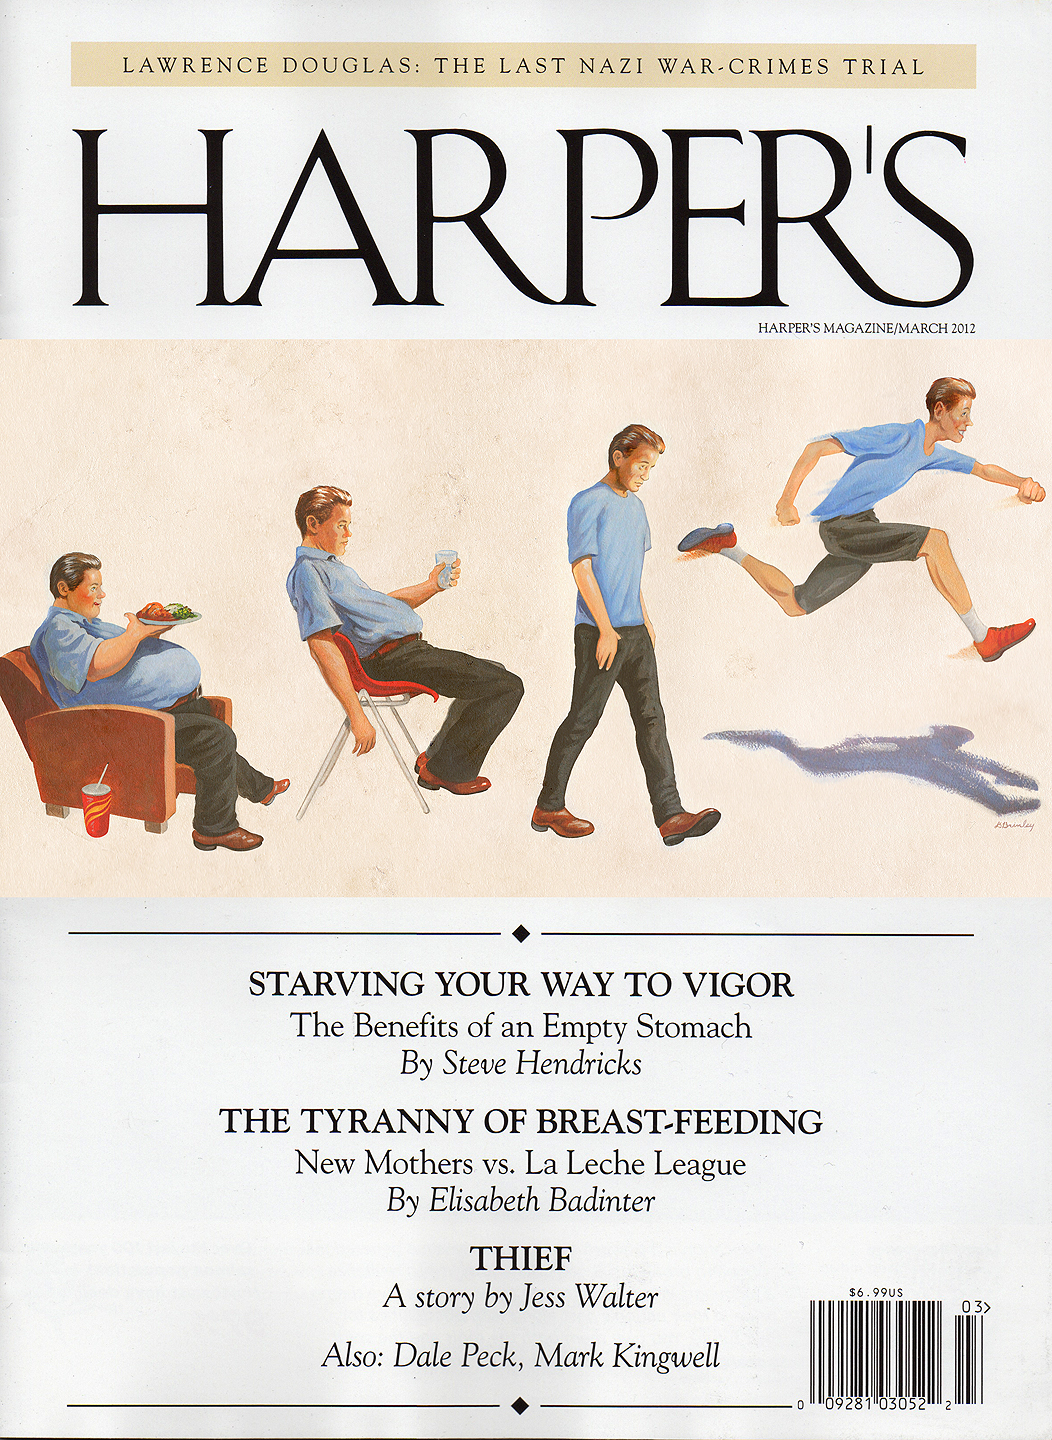   Starving Your Way To Vigor  | Harper's magazine cover 